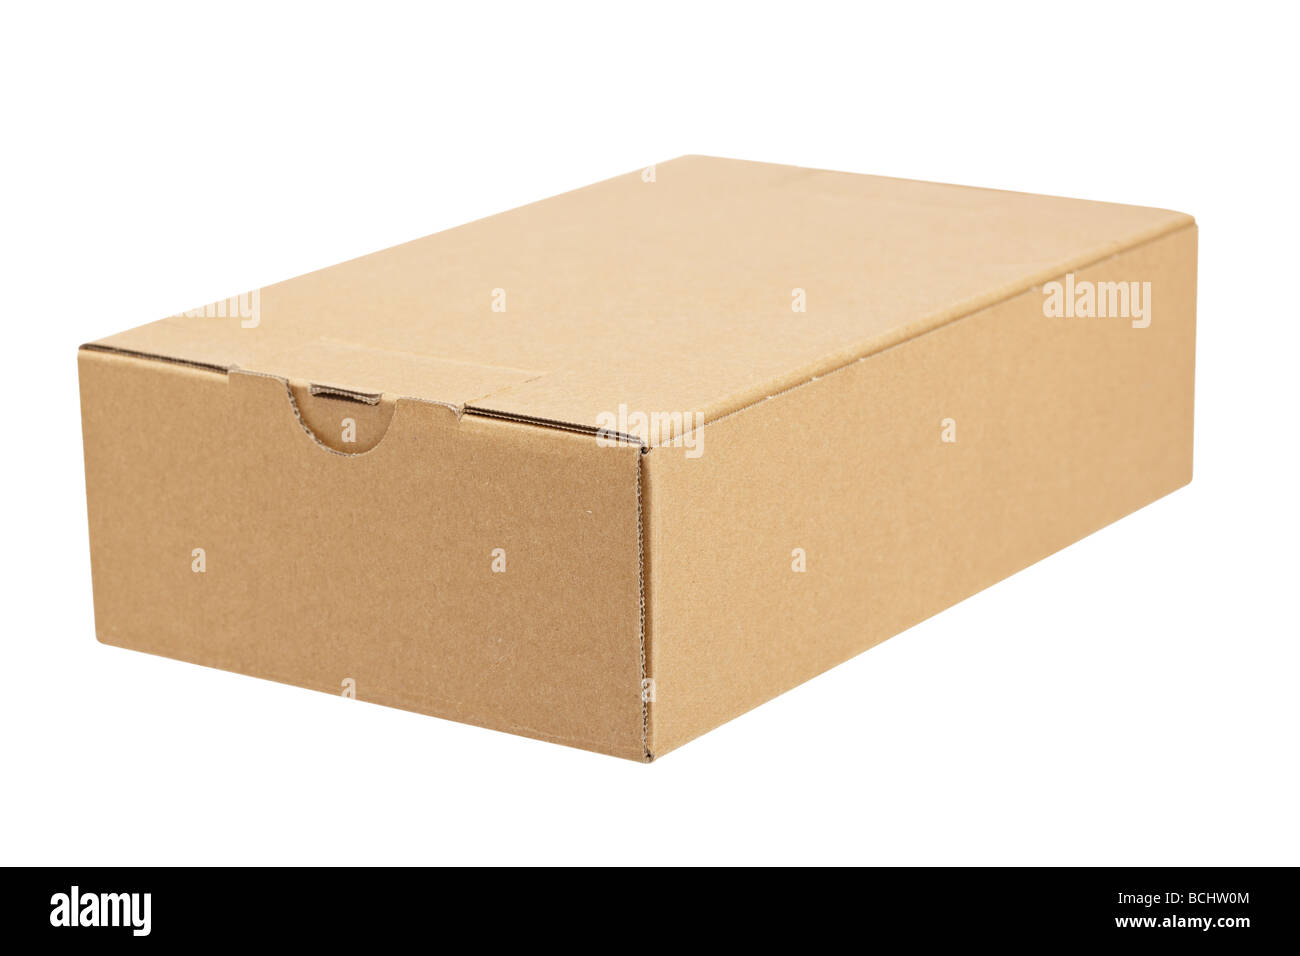 A cardboard box isolated on white background Shallow depth of field Stock Photo